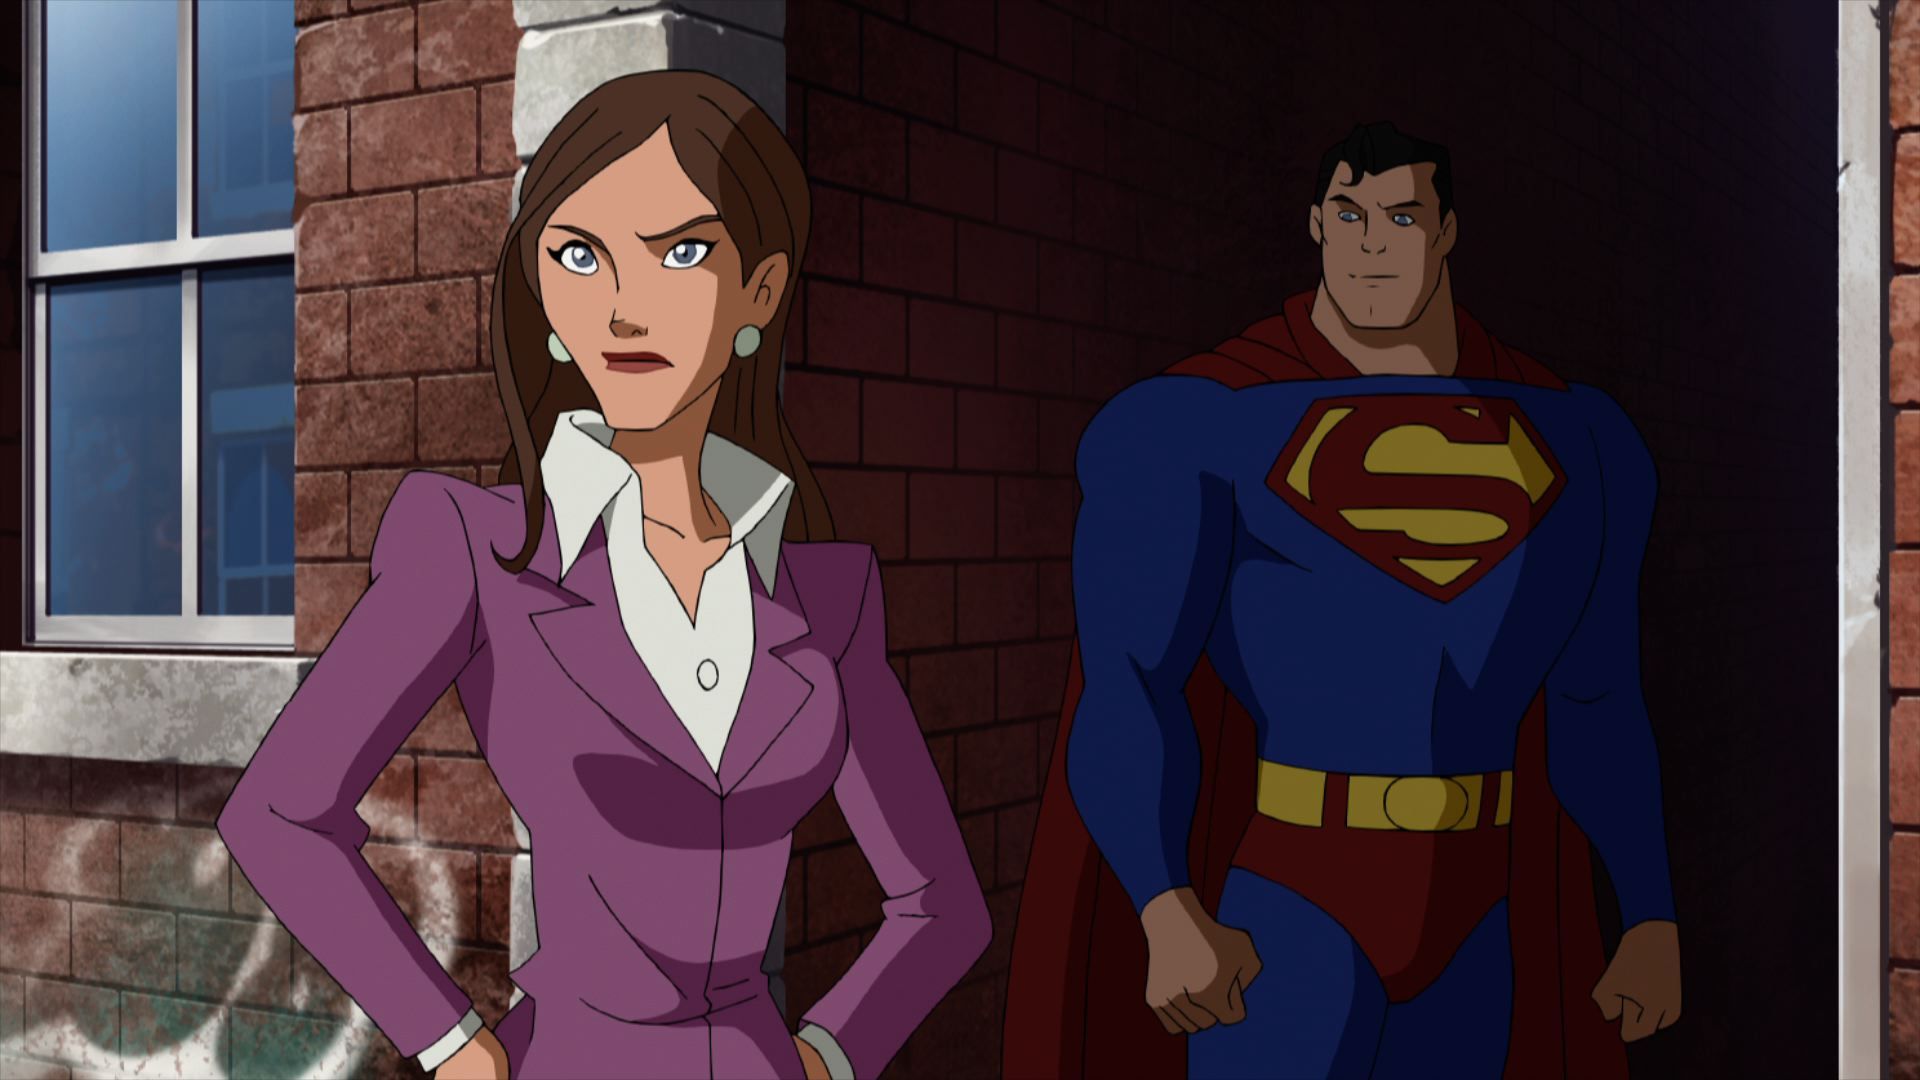 Pauley Perrette talks about voicing Lois Lane in Superman vs. The Elite